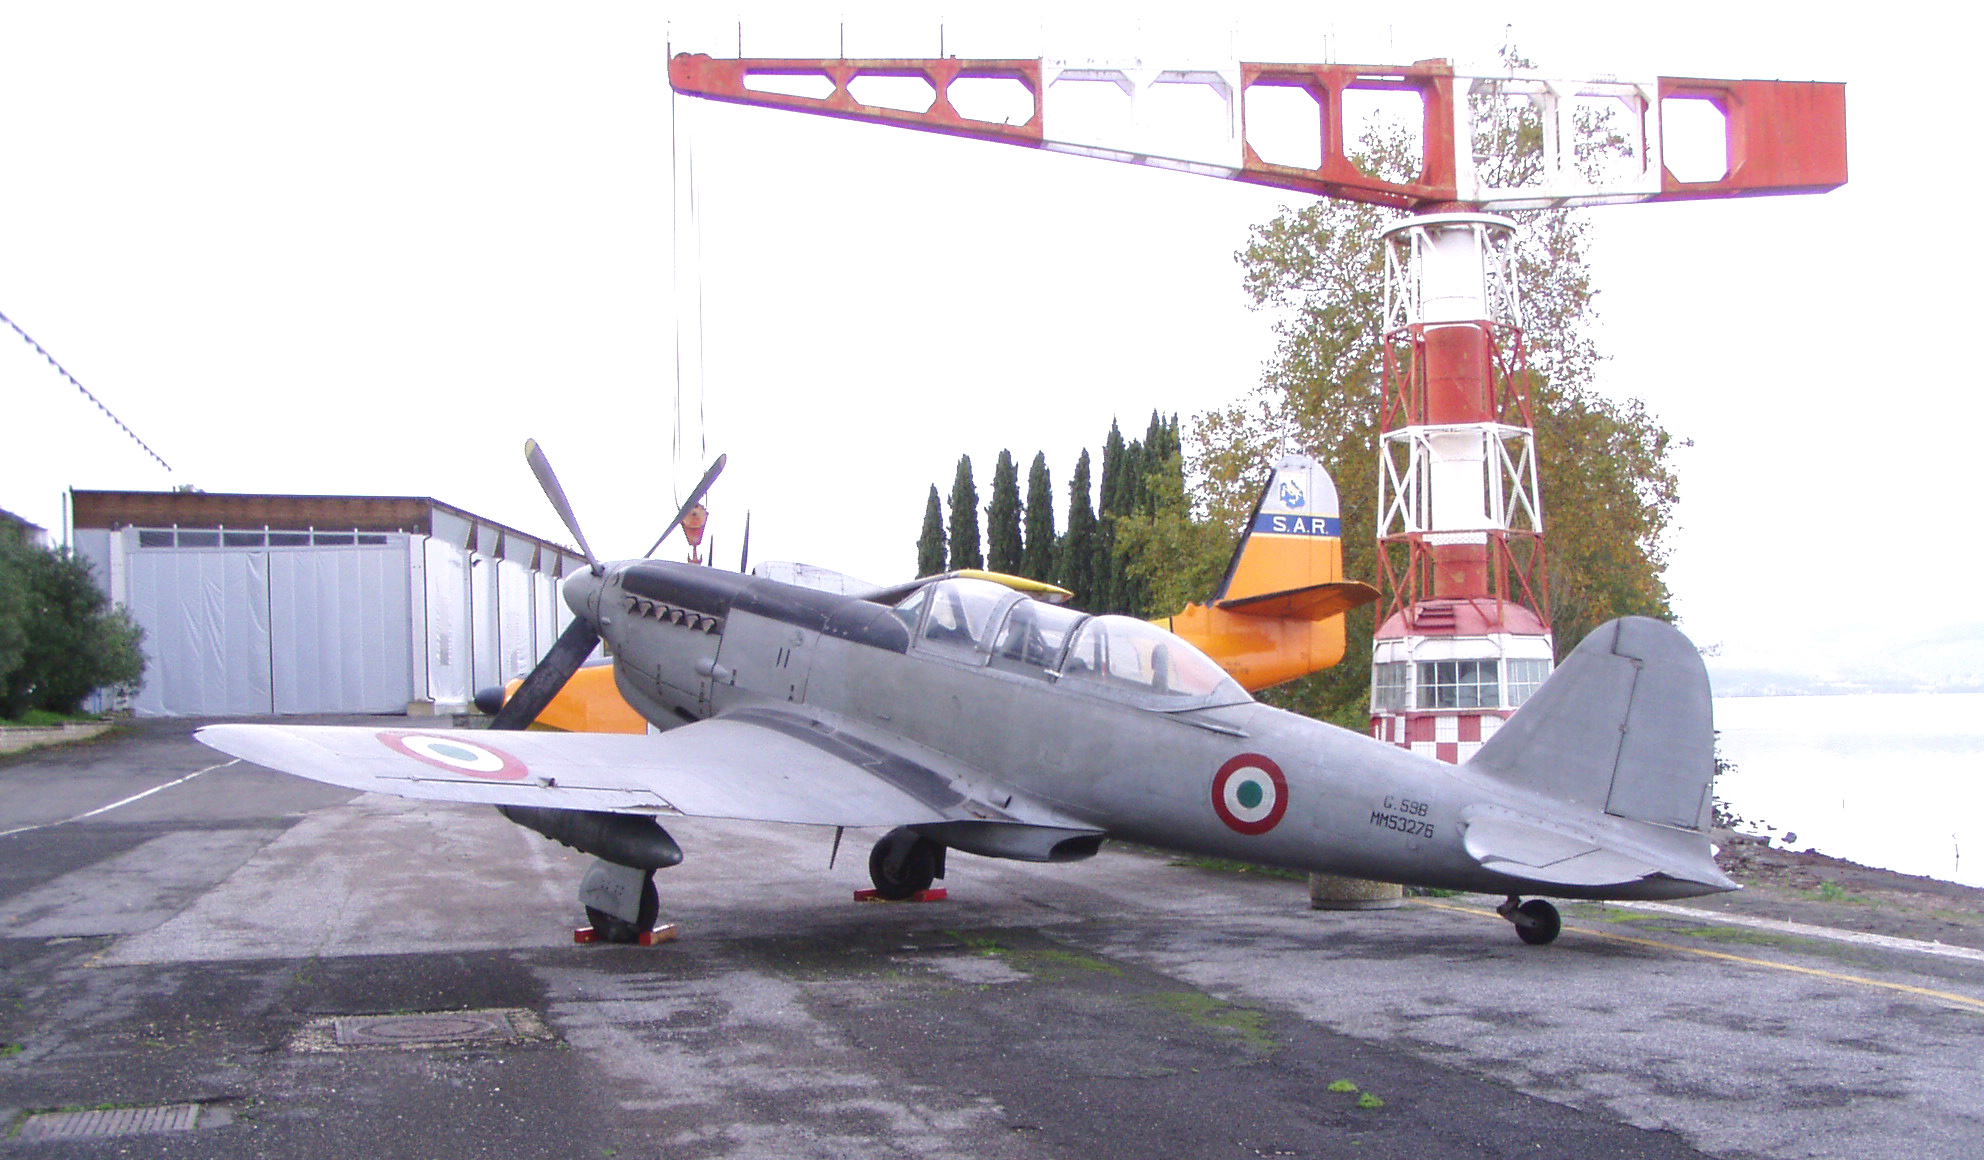 The Fiat G.59-4B (formerly 2B) M.M. 53276 during its transfer from the exhibition area to the restoration hangar in 2013. (Photo by Marco Gueli)